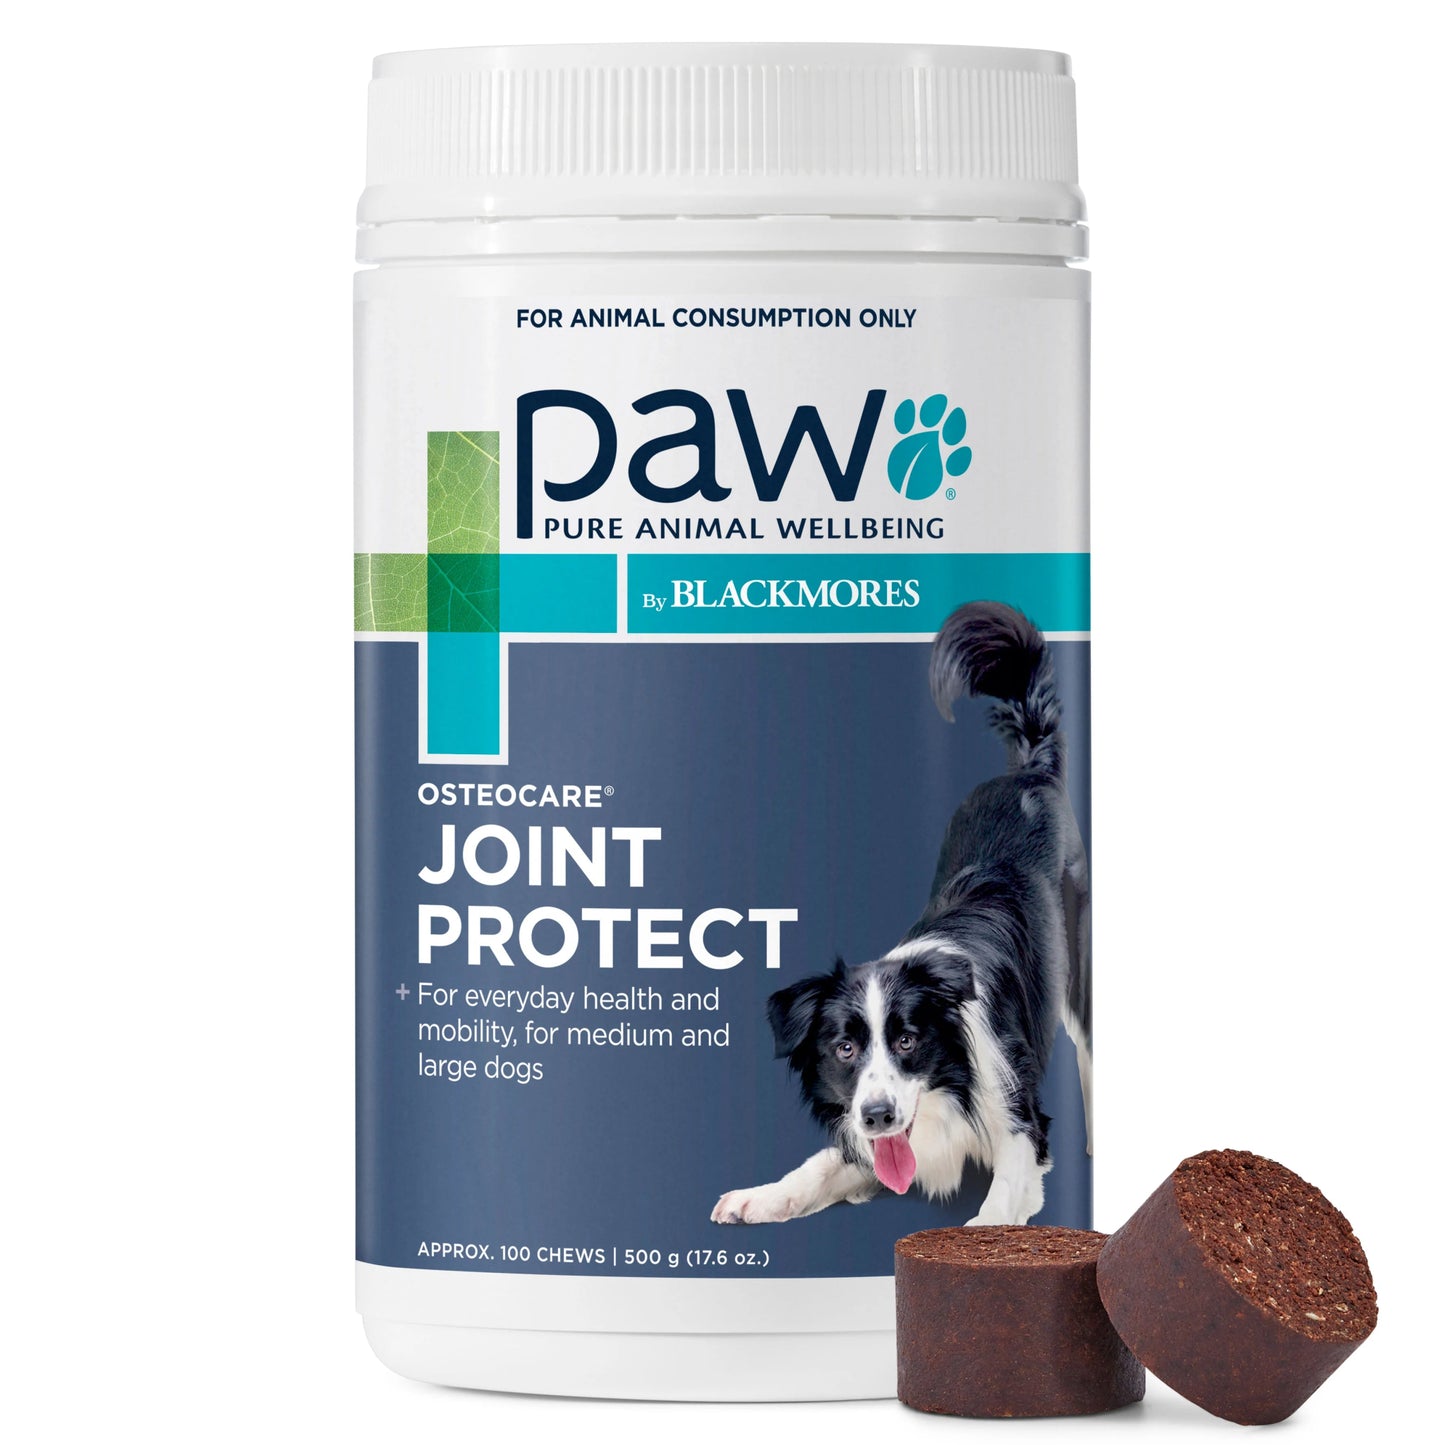 Paw Osteocare Joint Protect Chews - Woonona Petfood & Produce